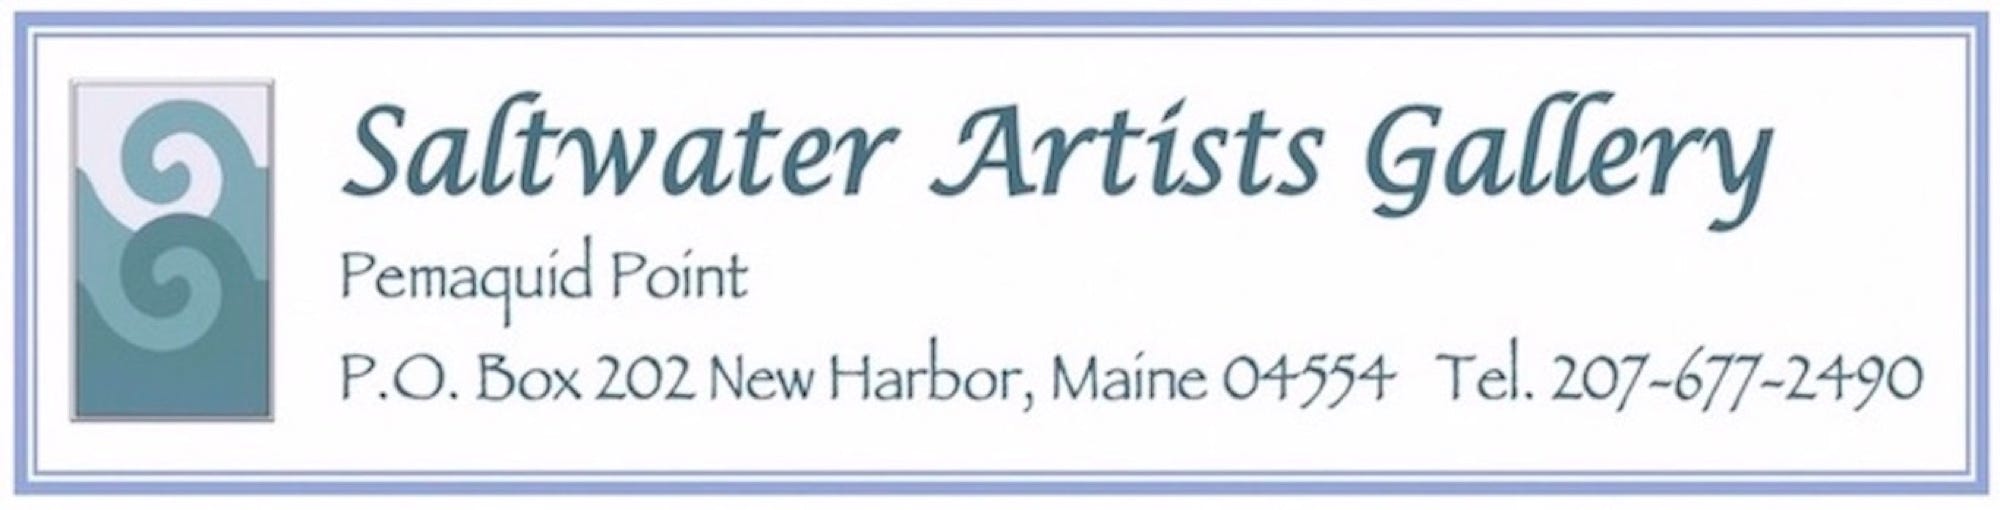 Saltwater Artists Gallery banner with logo